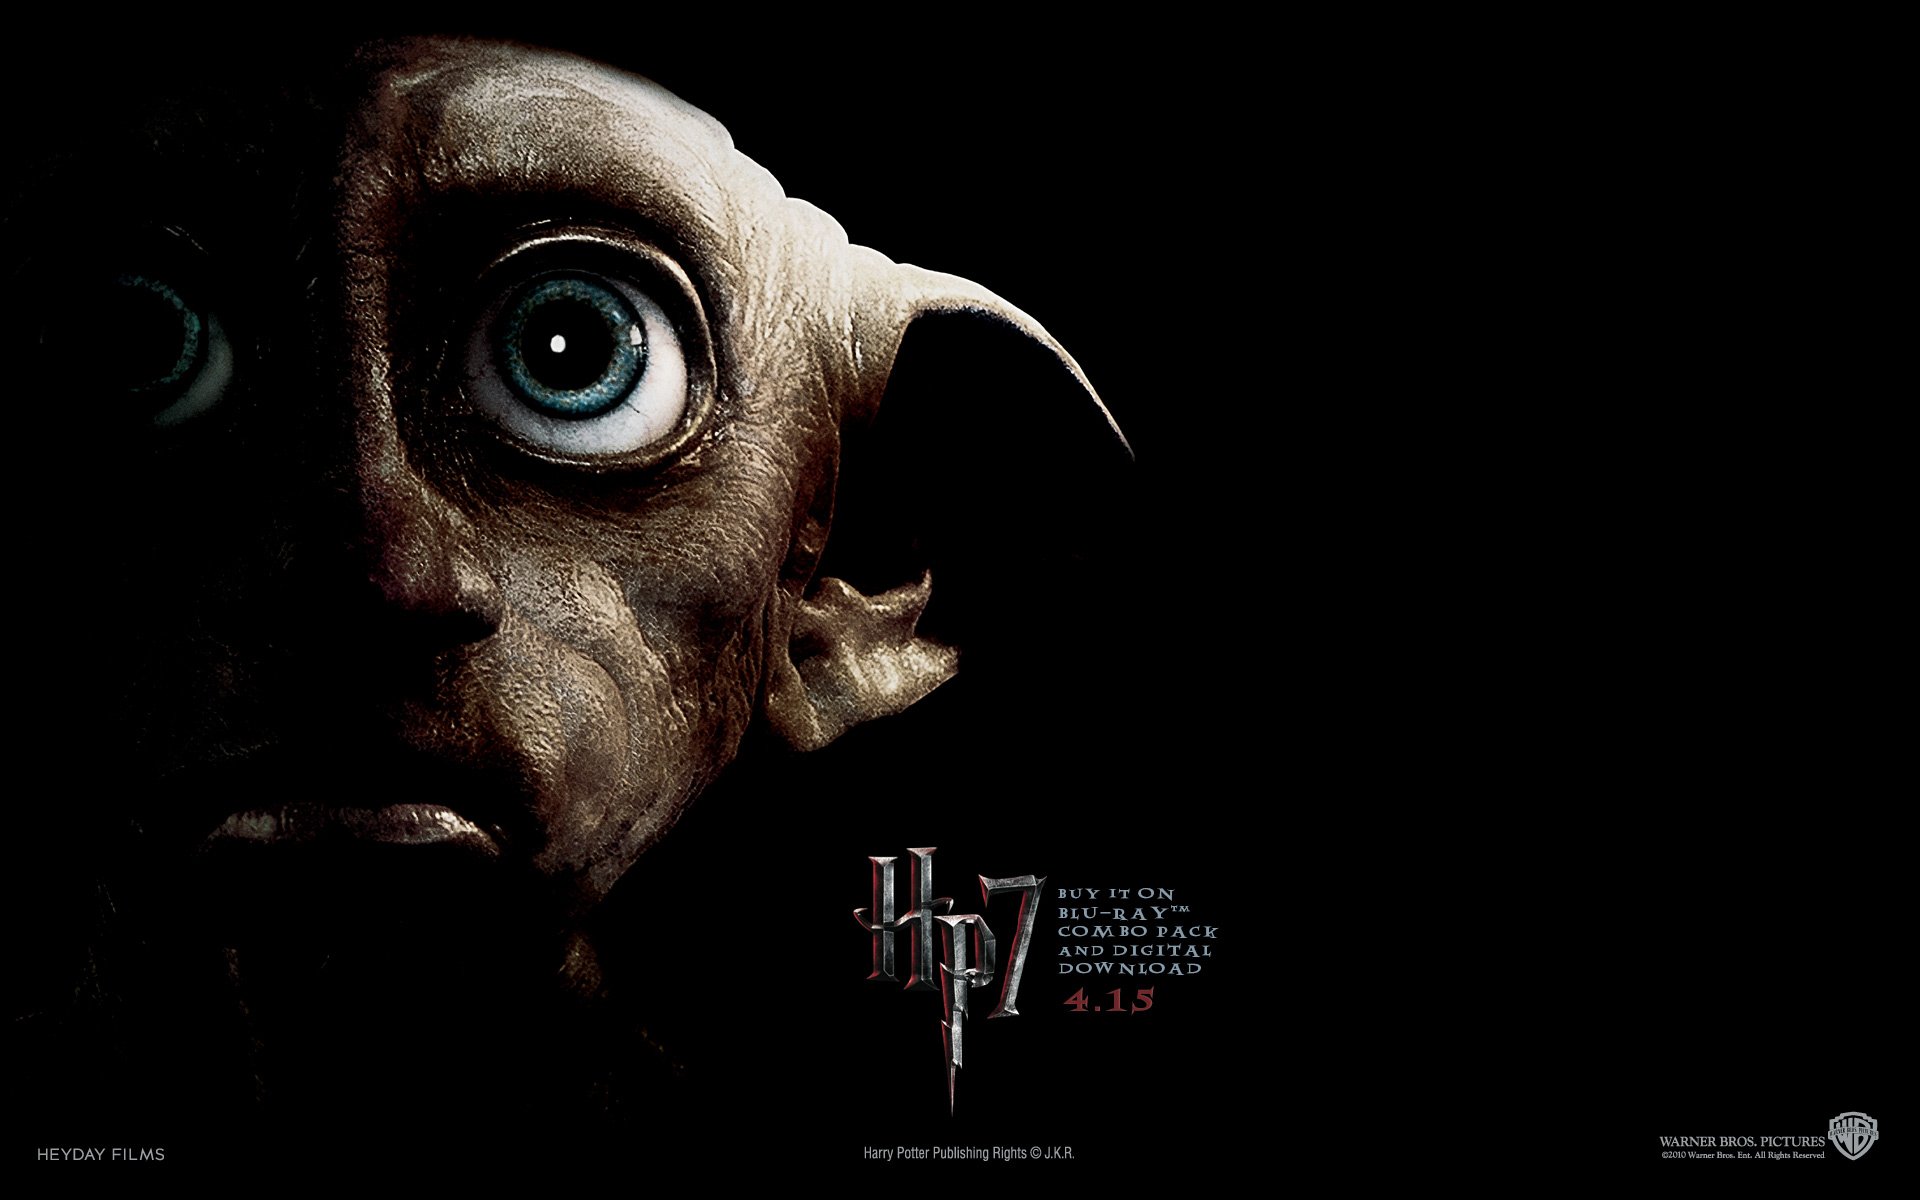 Harry Potter Wallpaper Hd - Dobby You Shall Not Harm Harry Potter - HD Wallpaper 